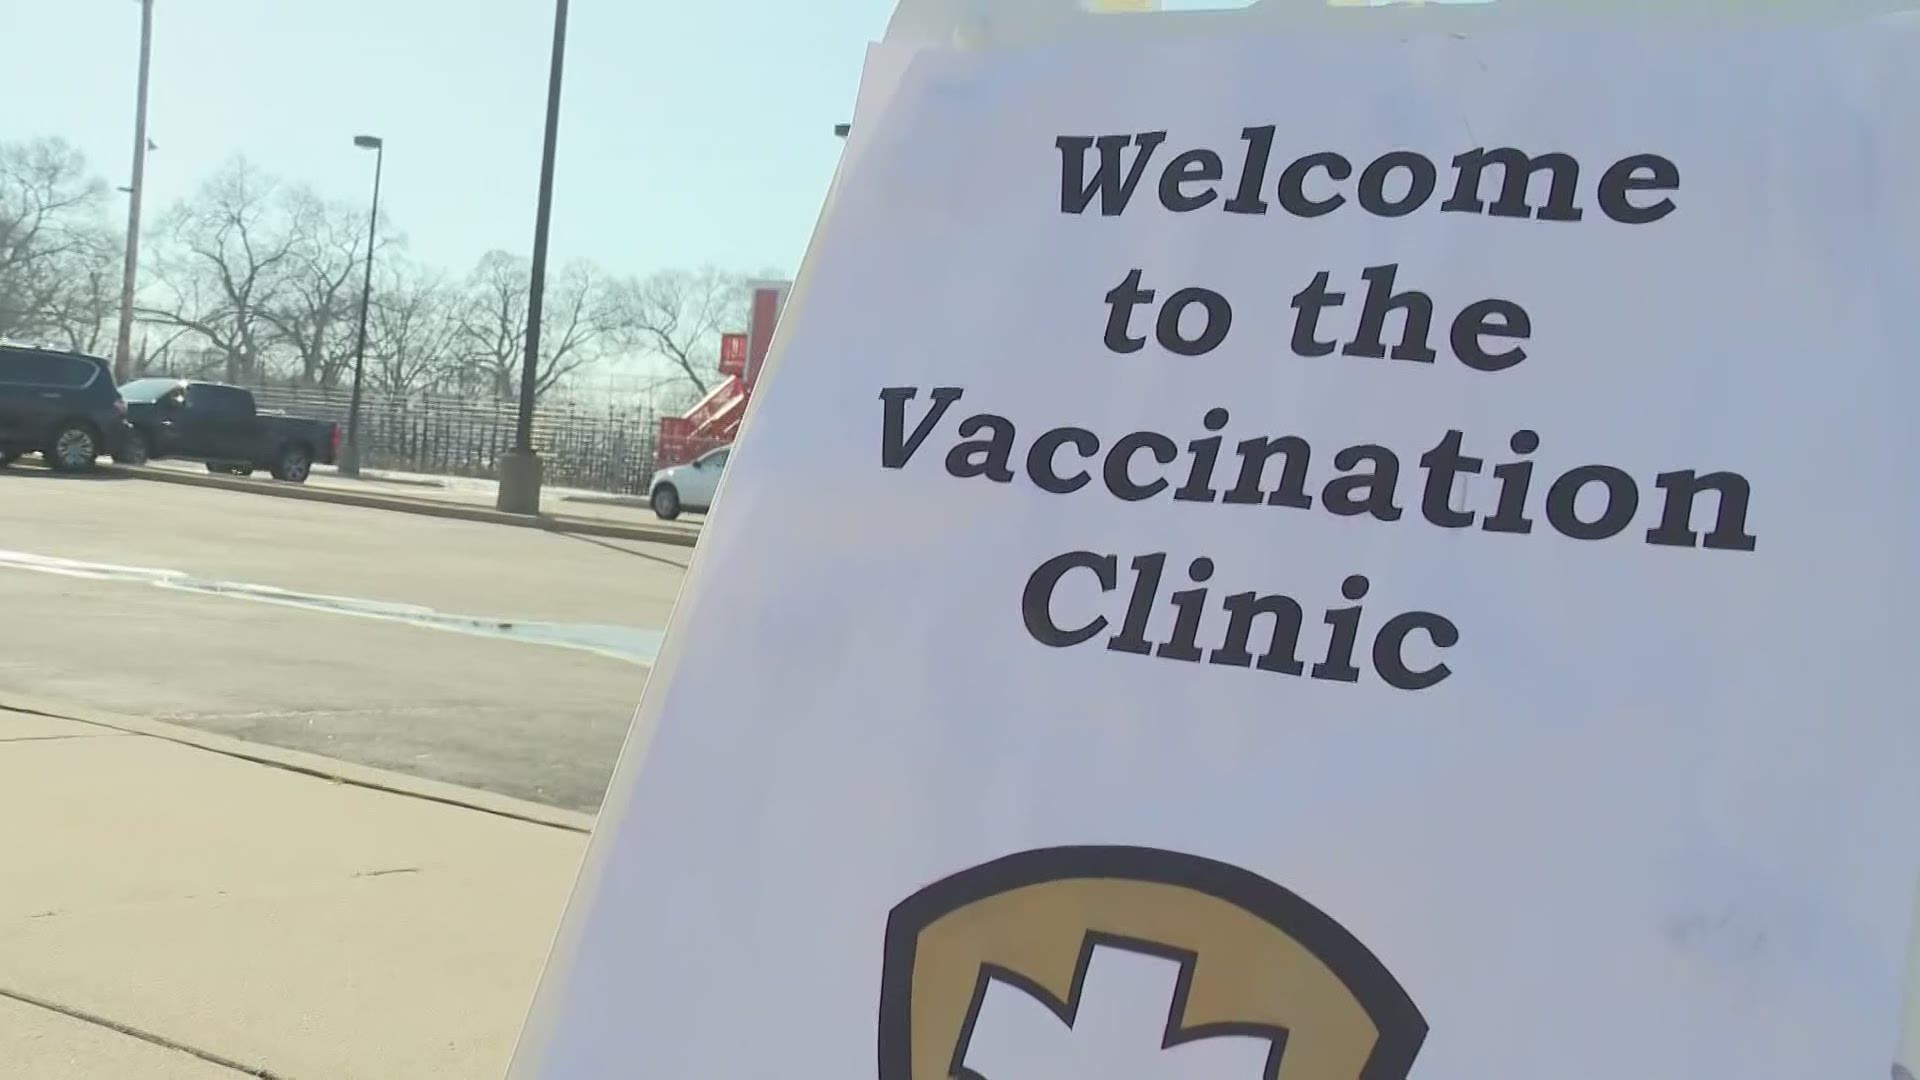 Michigan says all residents age 16 and up will become eligible for the COVID-19 vaccine on April 5, nearly a month before the May 1 date pledged by President Biden.